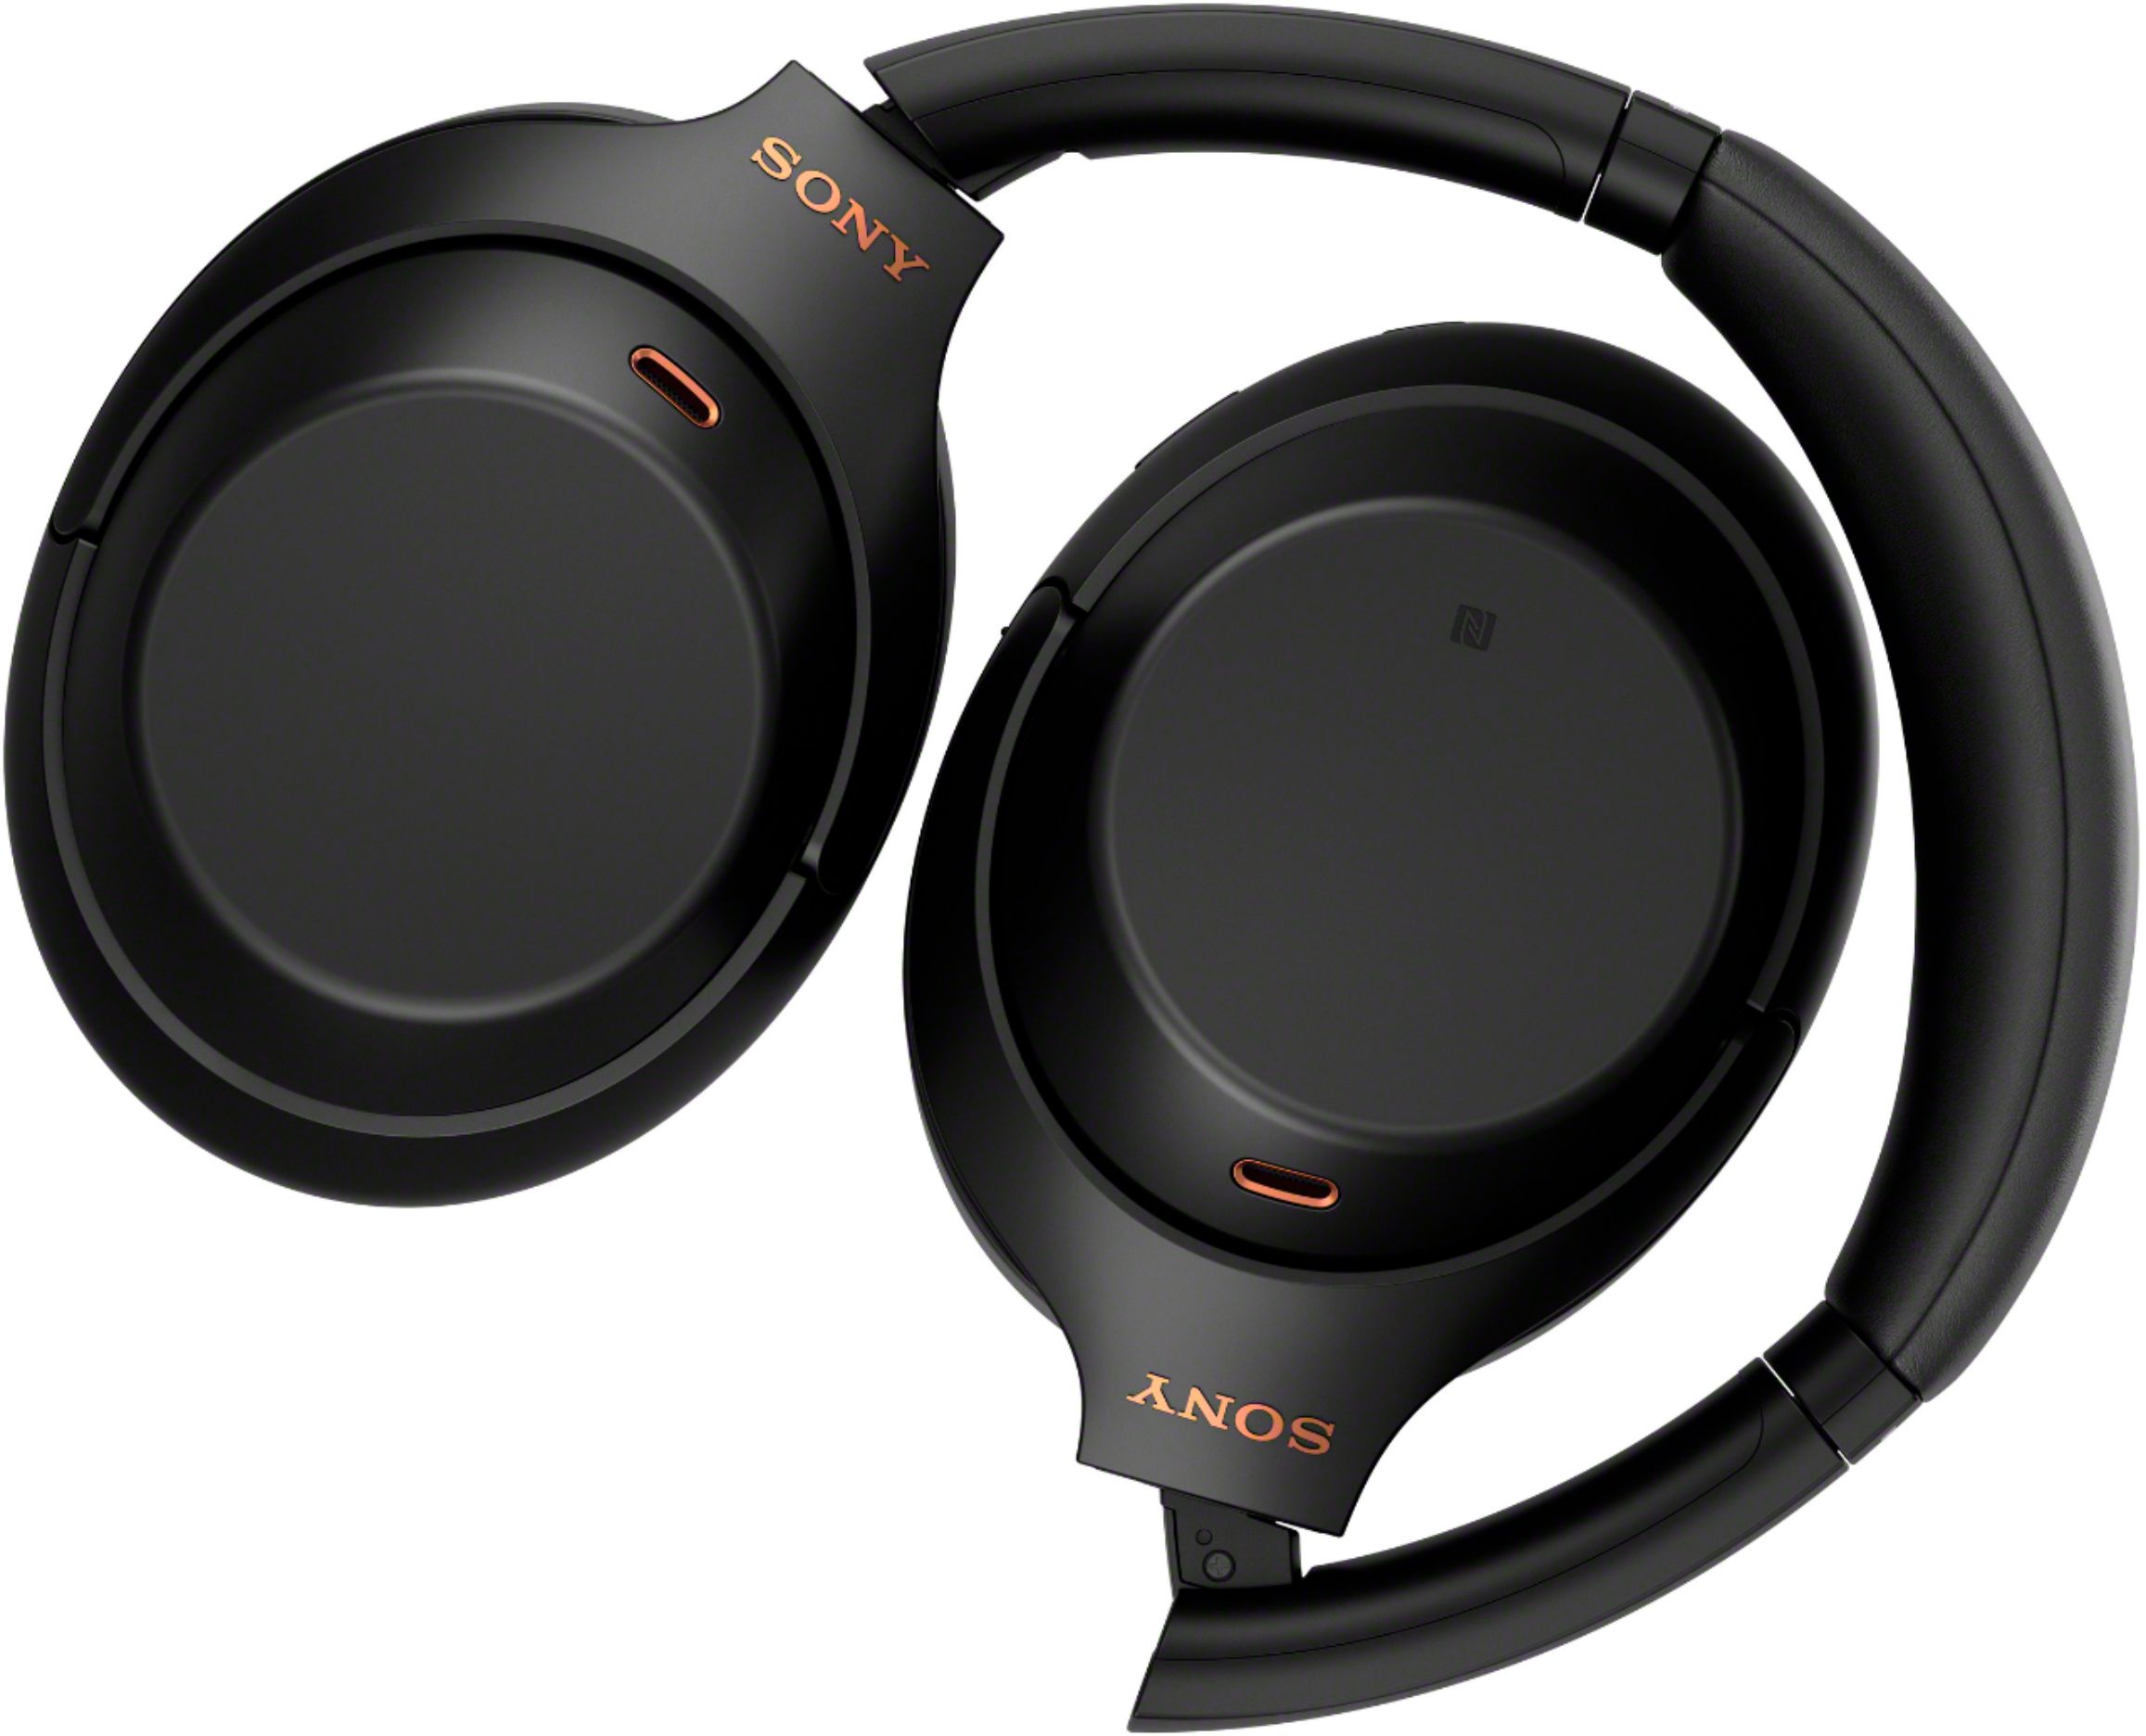 Sony WH-1000XM4 Wireless Noise-Cancelling Over-the-Ear Headphones Black  WH1000XM4/B - Best Buy